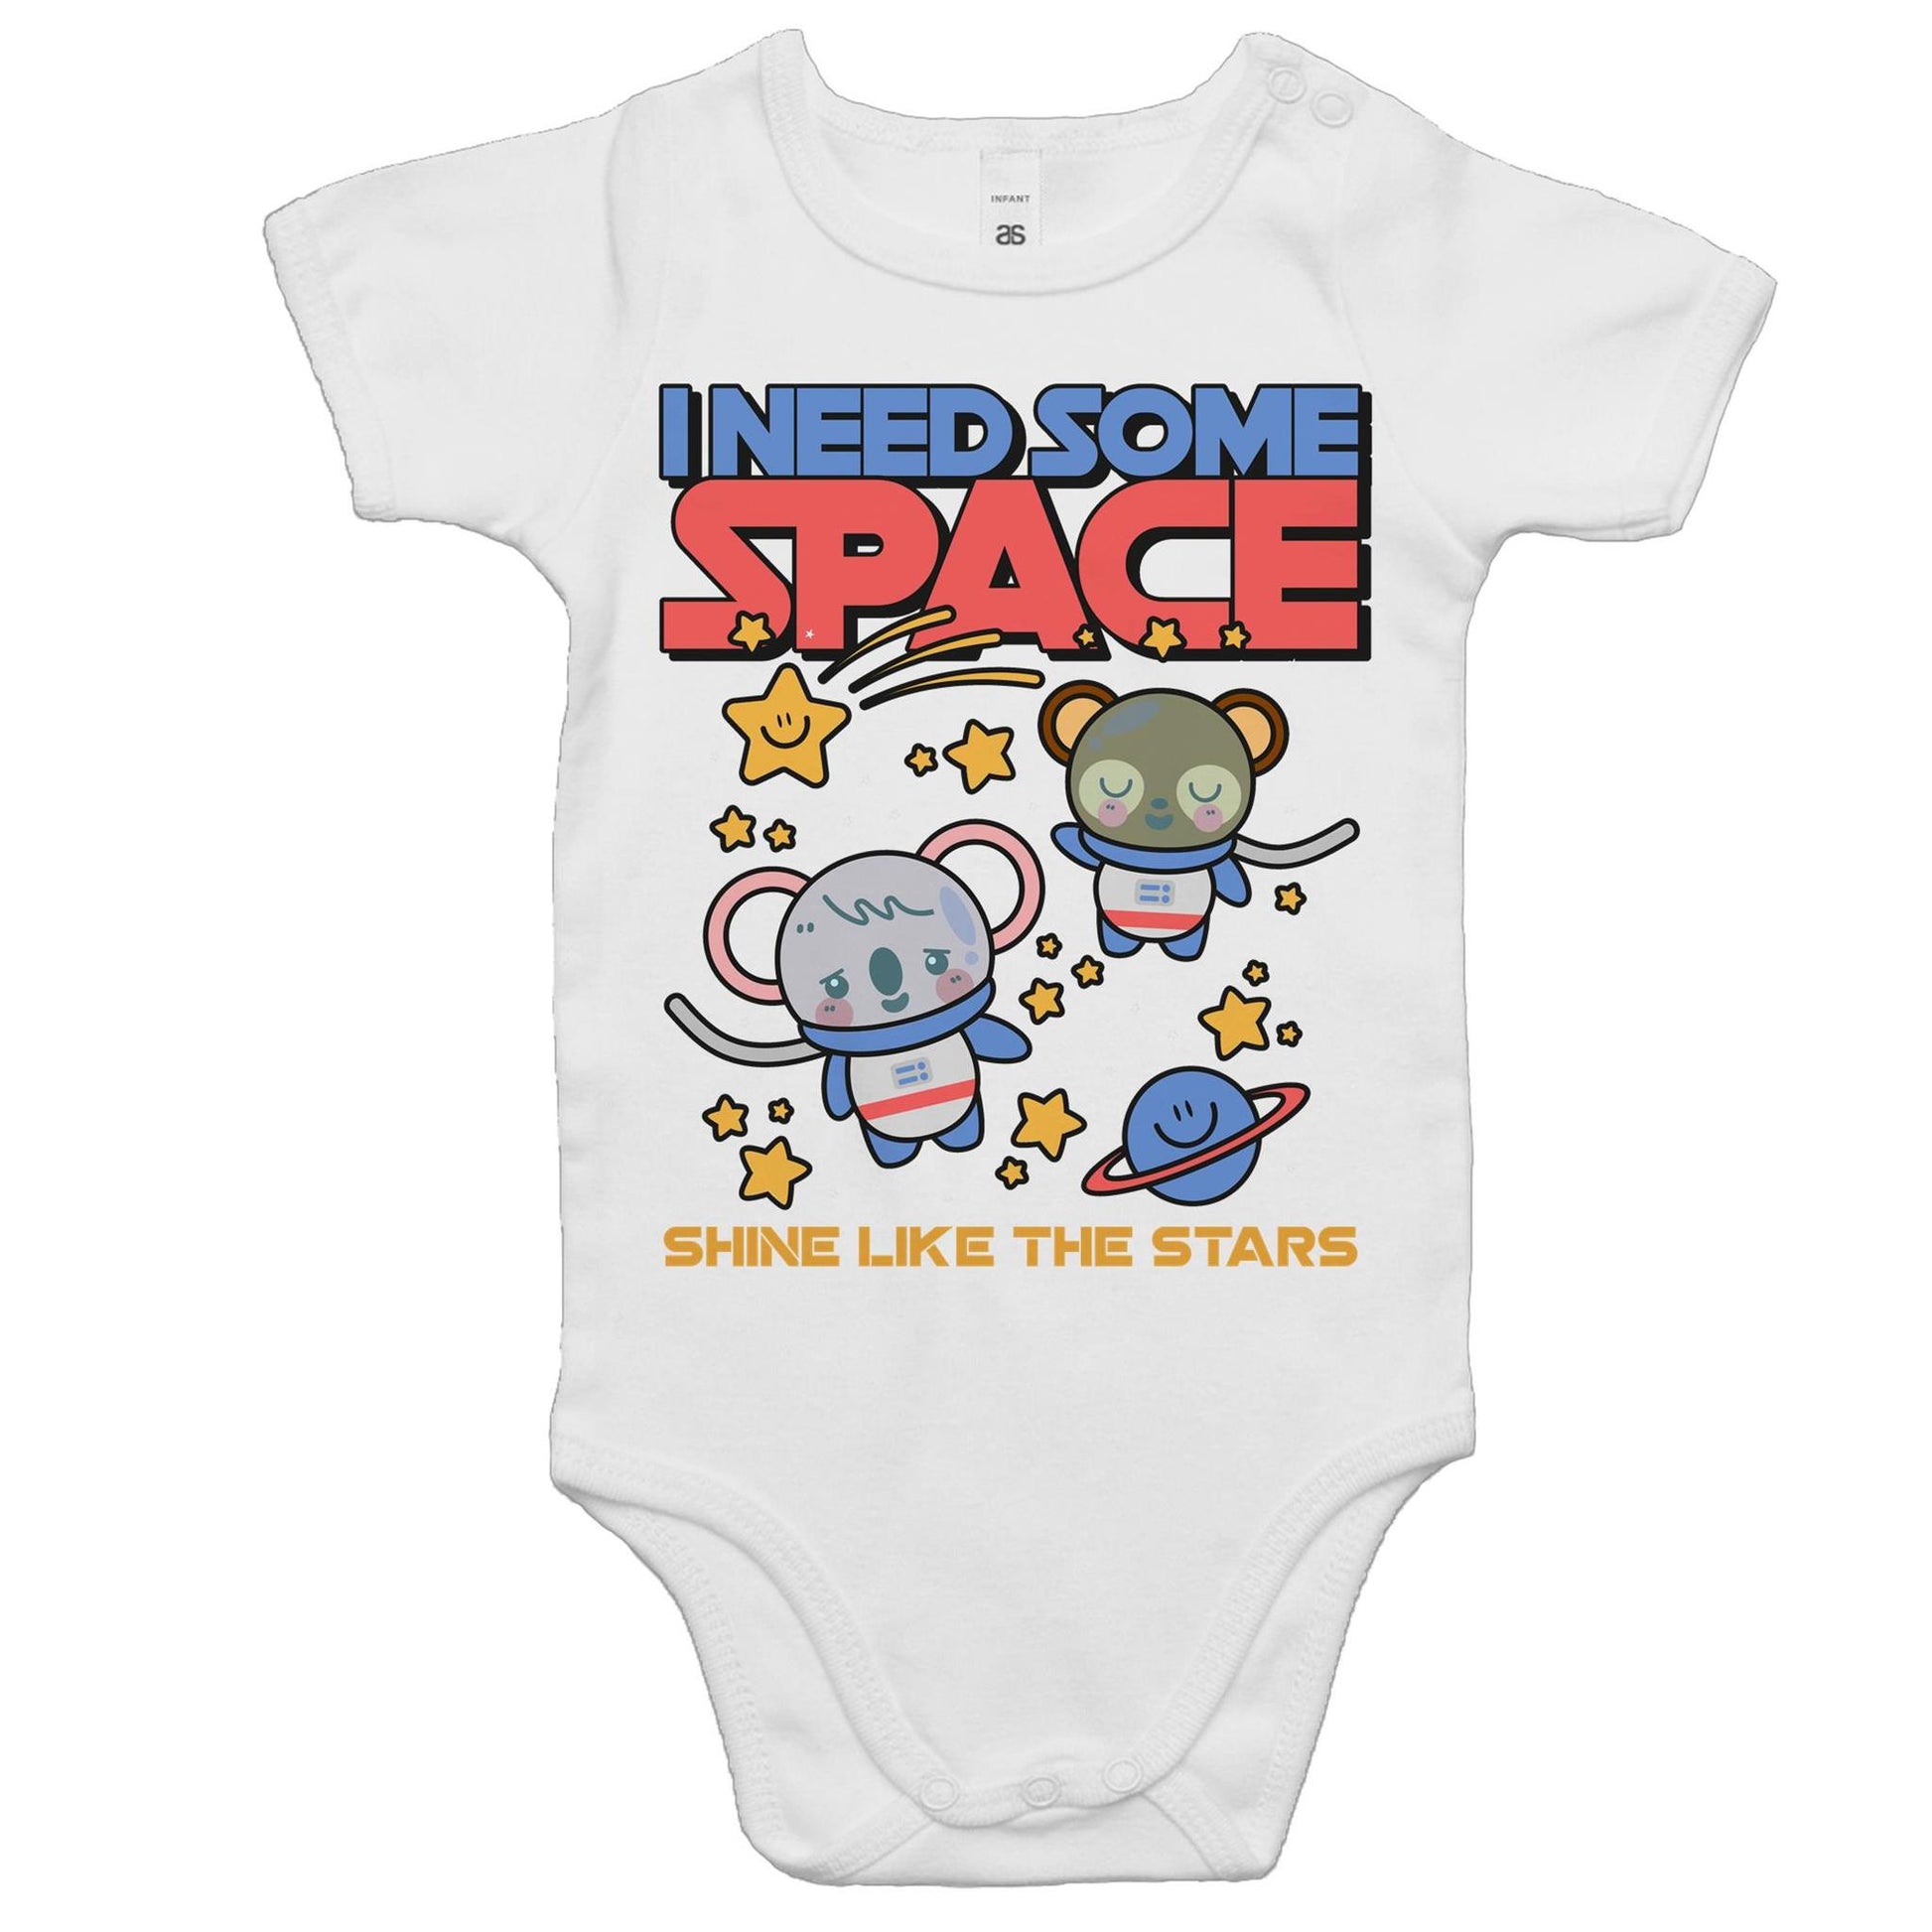 I Need Some Space - Baby Bodysuit White Baby Bodysuit Space